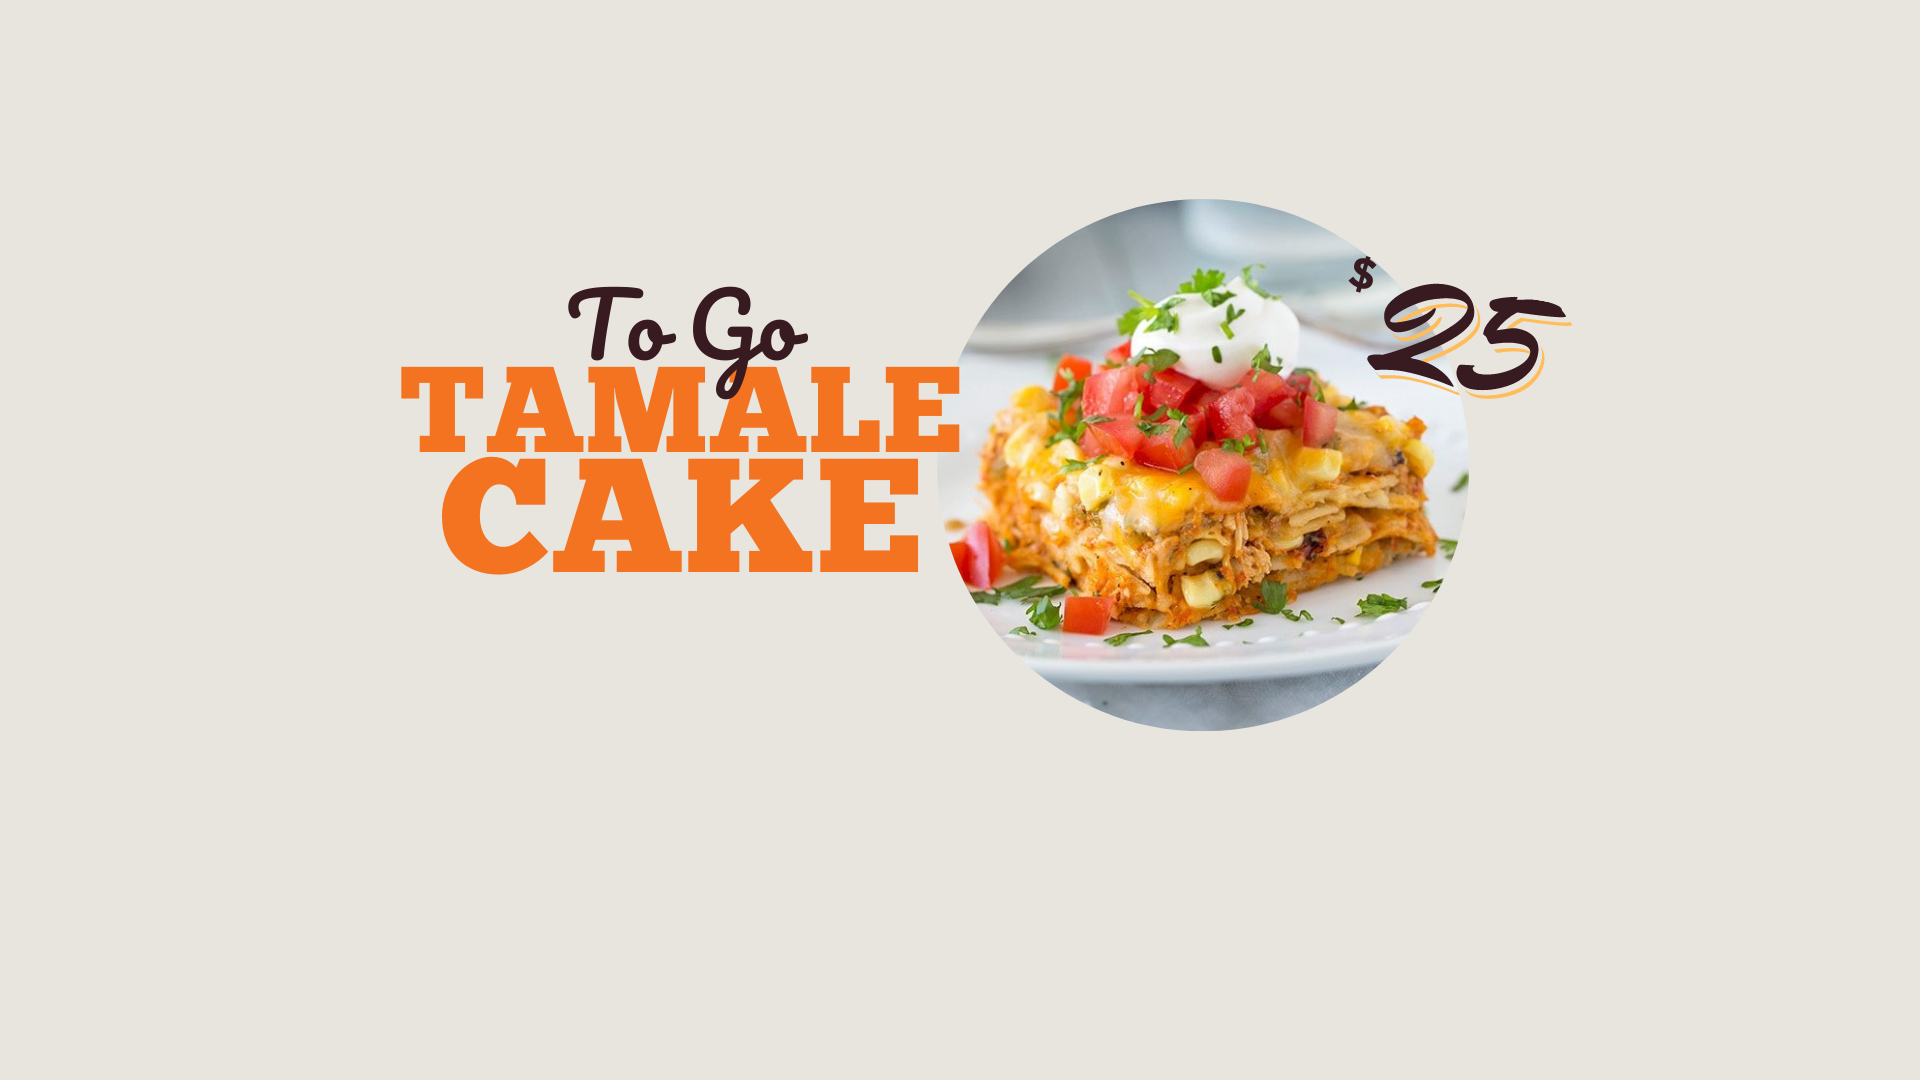 Order Your To Go Tamale Cake Today